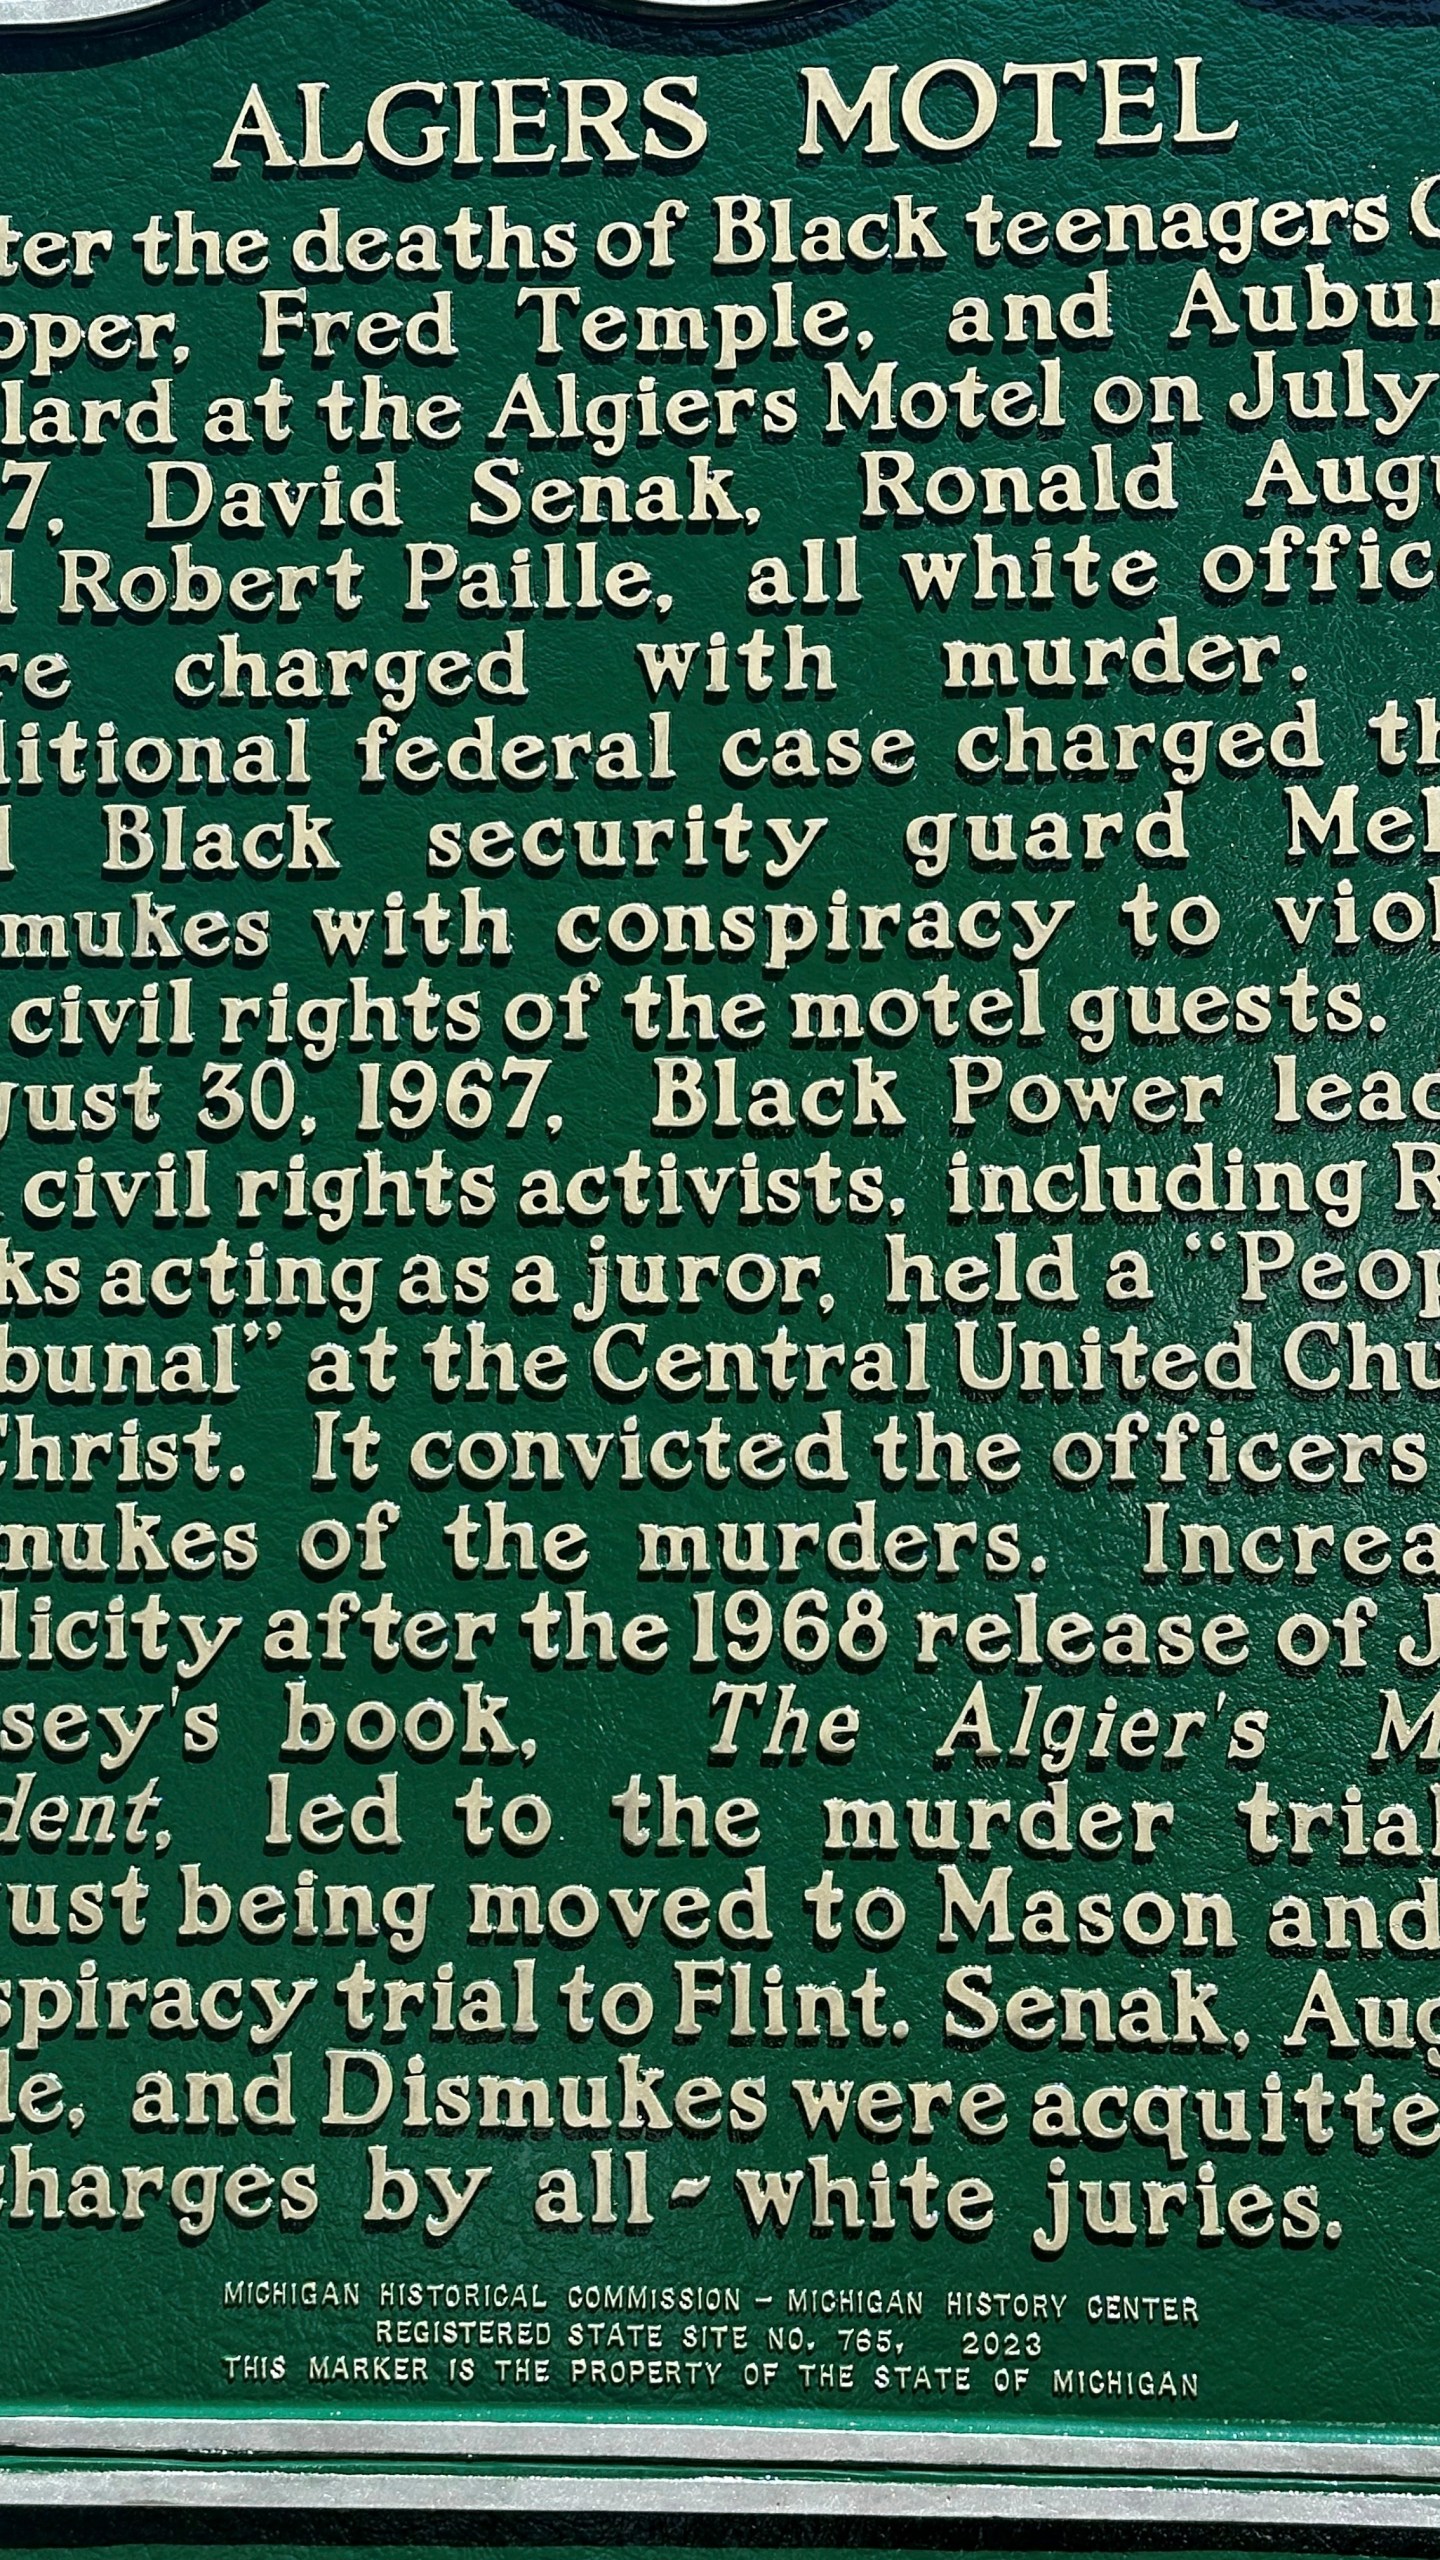 A historic marker was dedicated Friday, July 26, 2024 in Detroit to remember the deaths of Auburey Pollard, 19, Carl Cooper, 17, and Fred Temple, 18, whose bodies were found in the Algiers Motel and adjacent Manor House during the city's 1967 race riot. The young Black men allegedly were killed by white police officers during a raid on the building. No officers ever were convicted in their deaths. (AP Photo/Corey Williams)